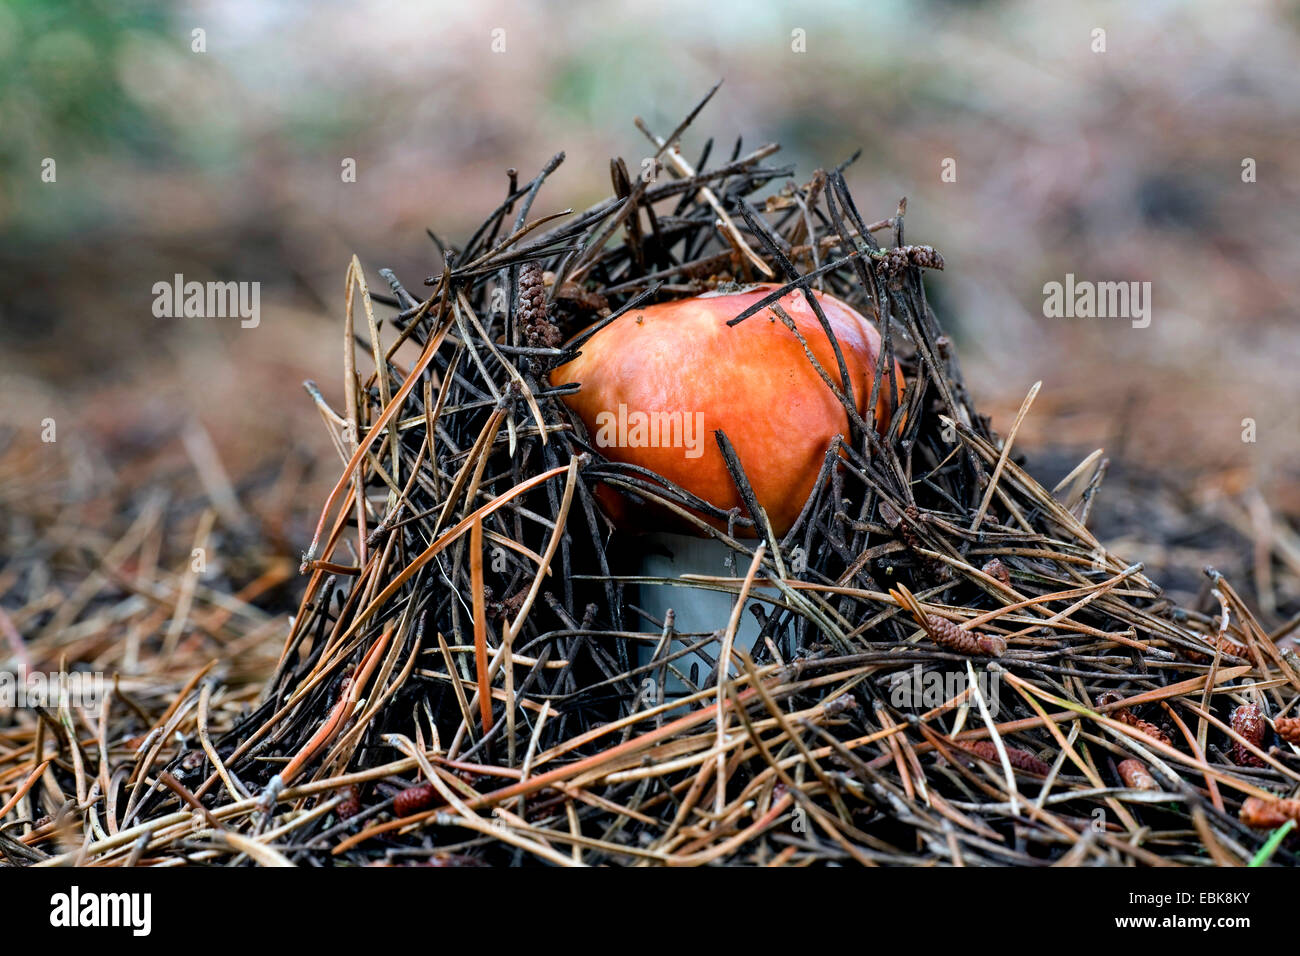 Copper brittlegill, Red-capped Russula  (Russula decolorans), braking through the forestground with pine needles, Denmark, Jylland Stock Photo